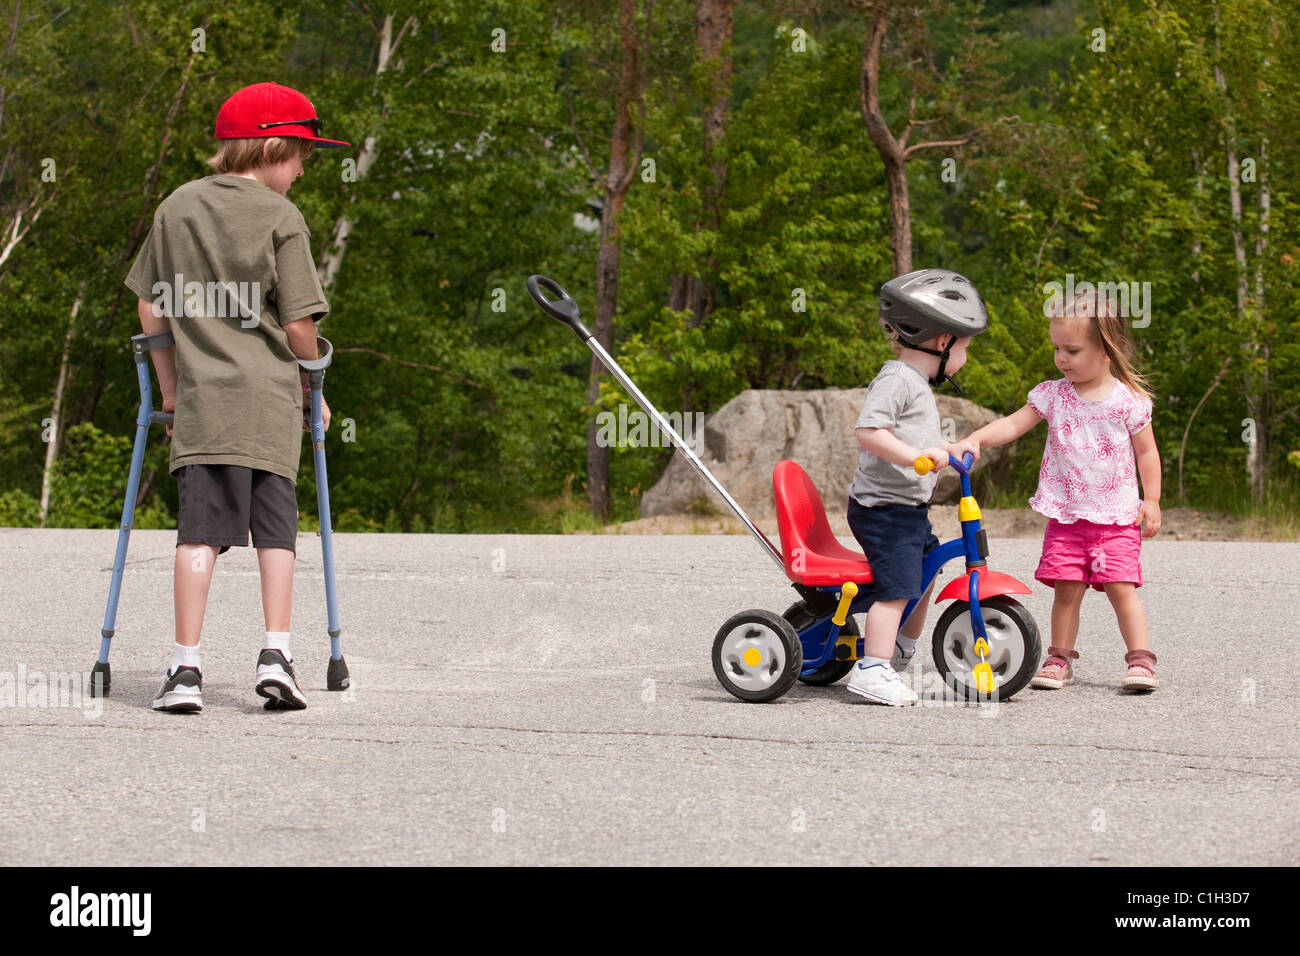 Boy with degenerative disease using crutches and a boy on tricycle with joint problems, little girl able bodied Stock Photo